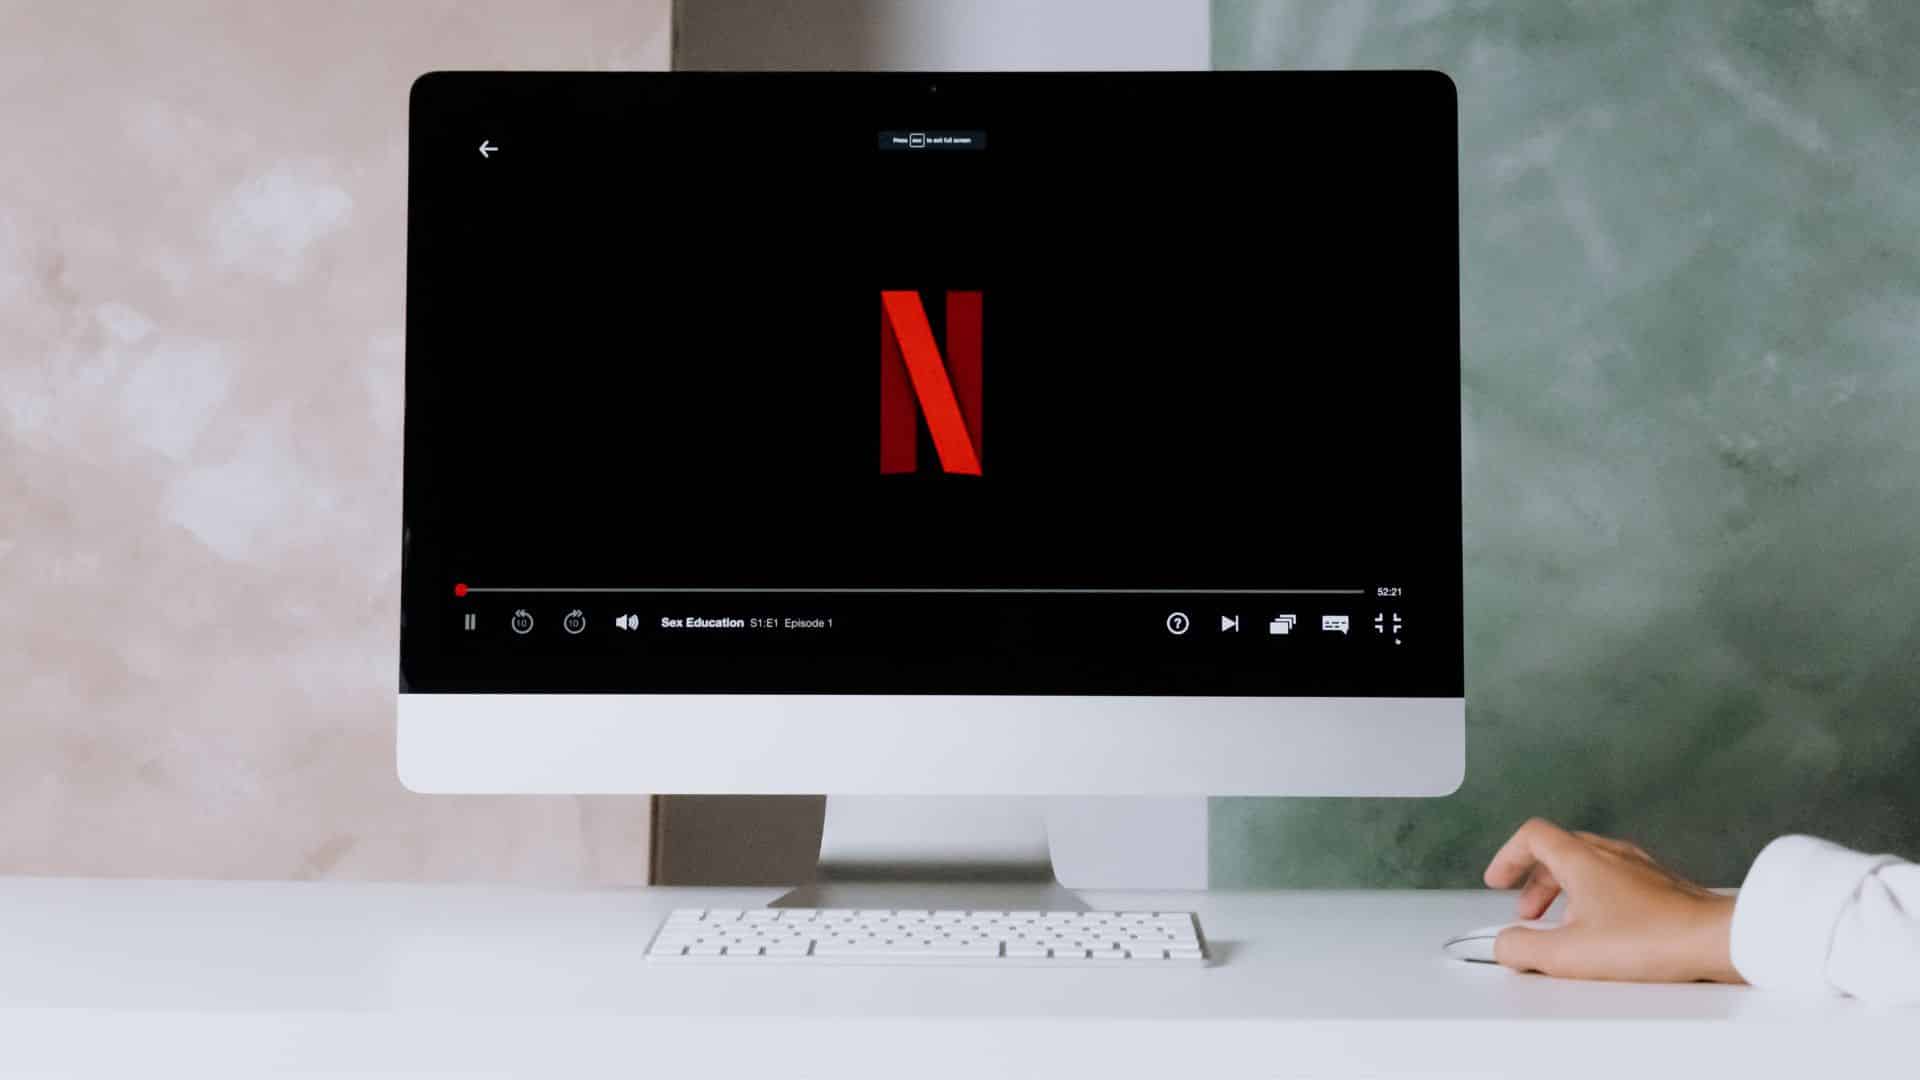 Netflix Enhances User Experience with Improved Filtering Options for "My List"